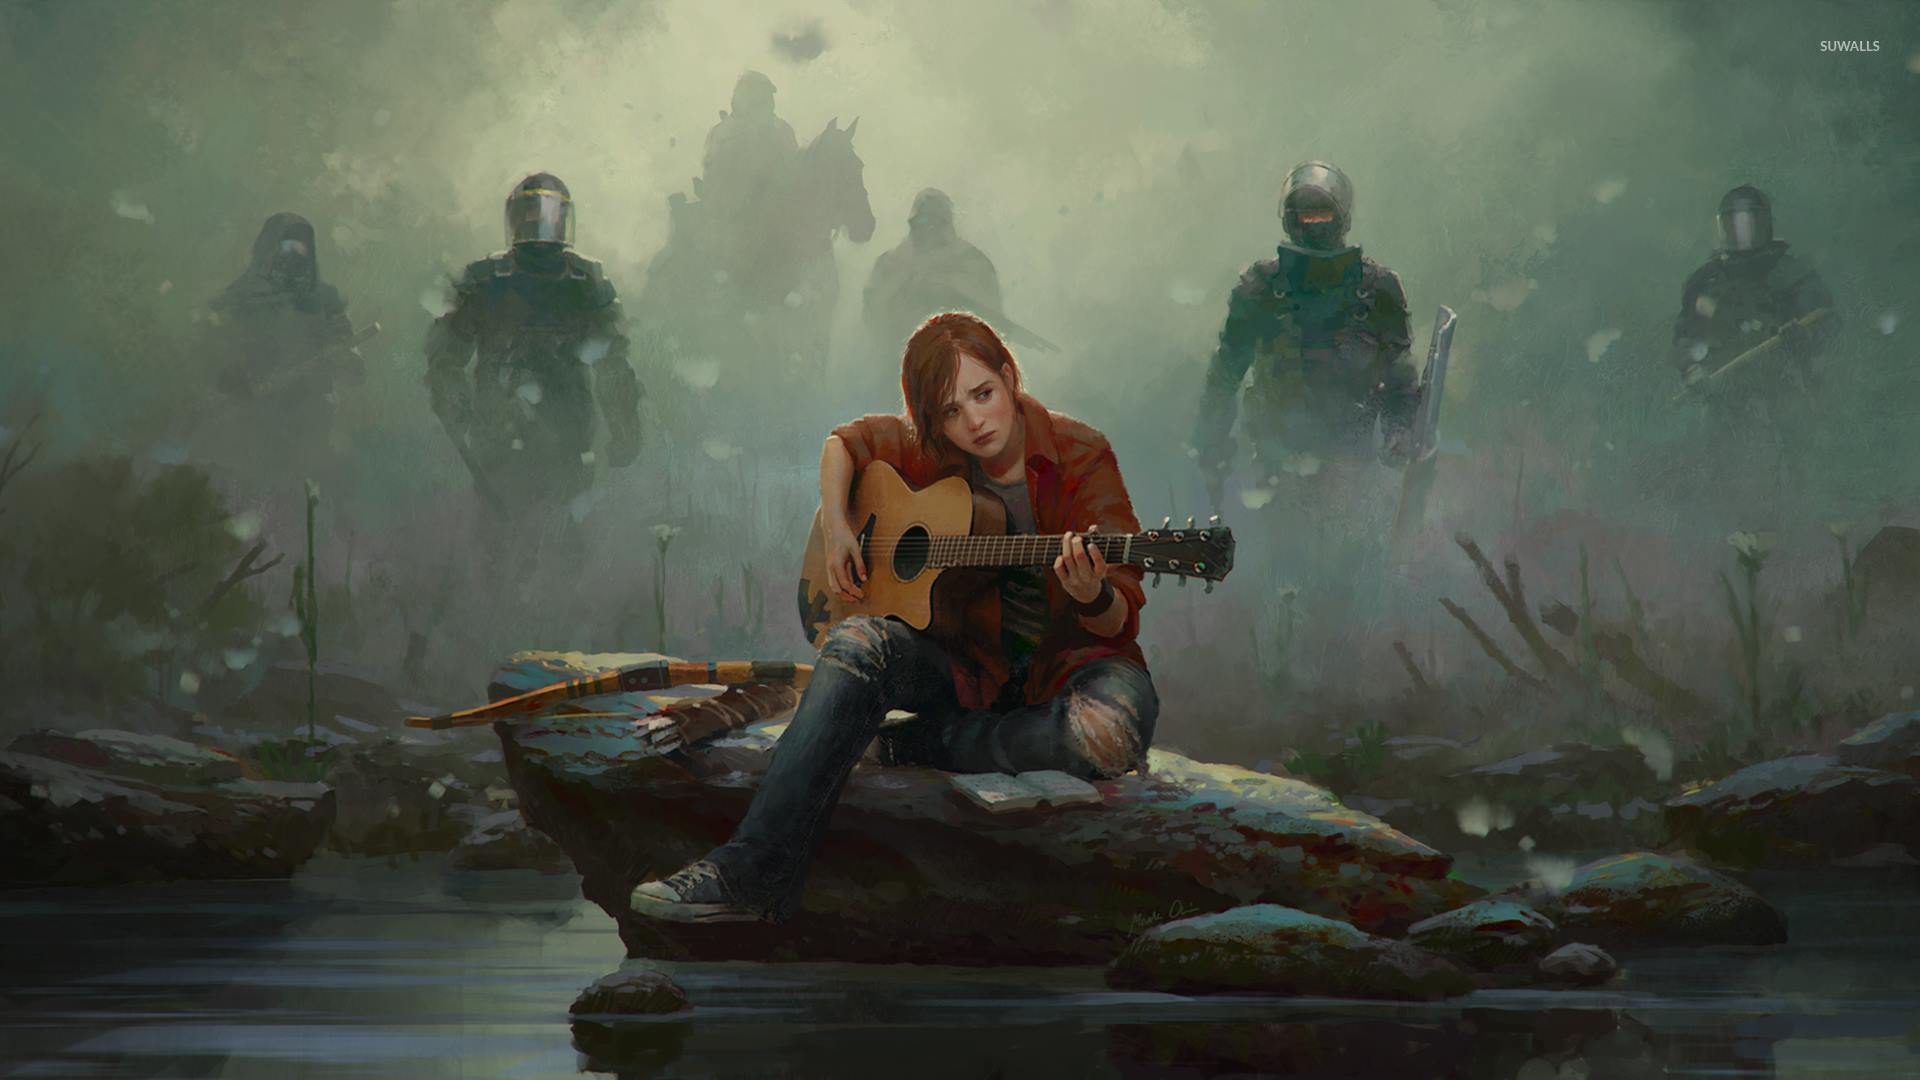 Ellie   The Last of Us wallpaper   Game wallpapers   30626